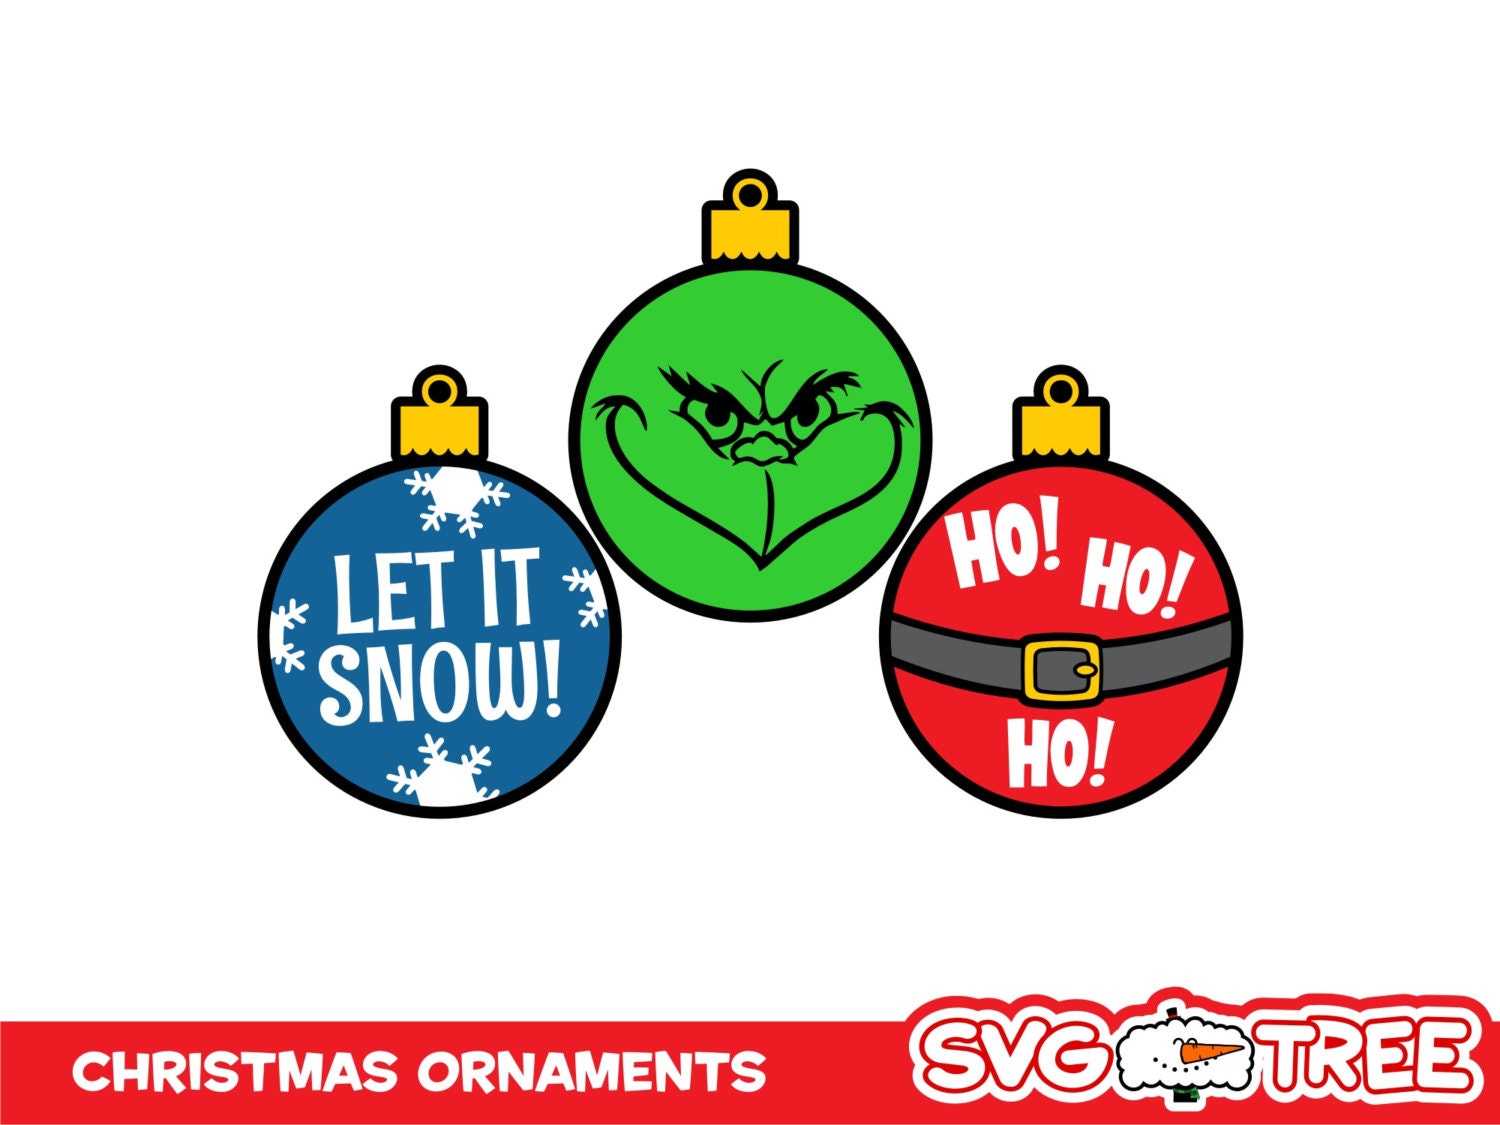 Download Christmas Ornaments Grinch Santa Claus Snow SVG DXF by SVGTREE